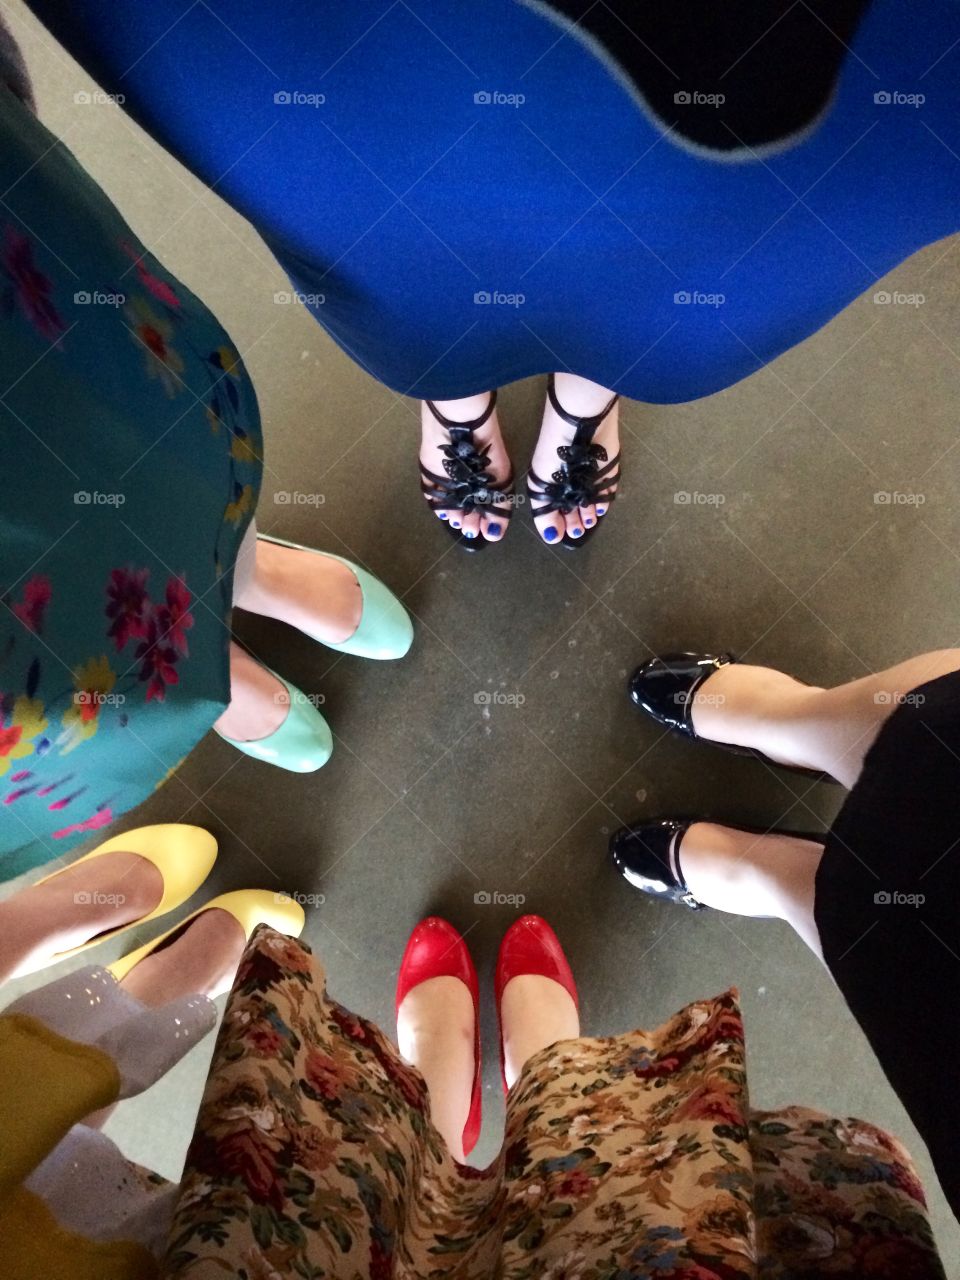 We had on some very colorful shoes. Had to document it 